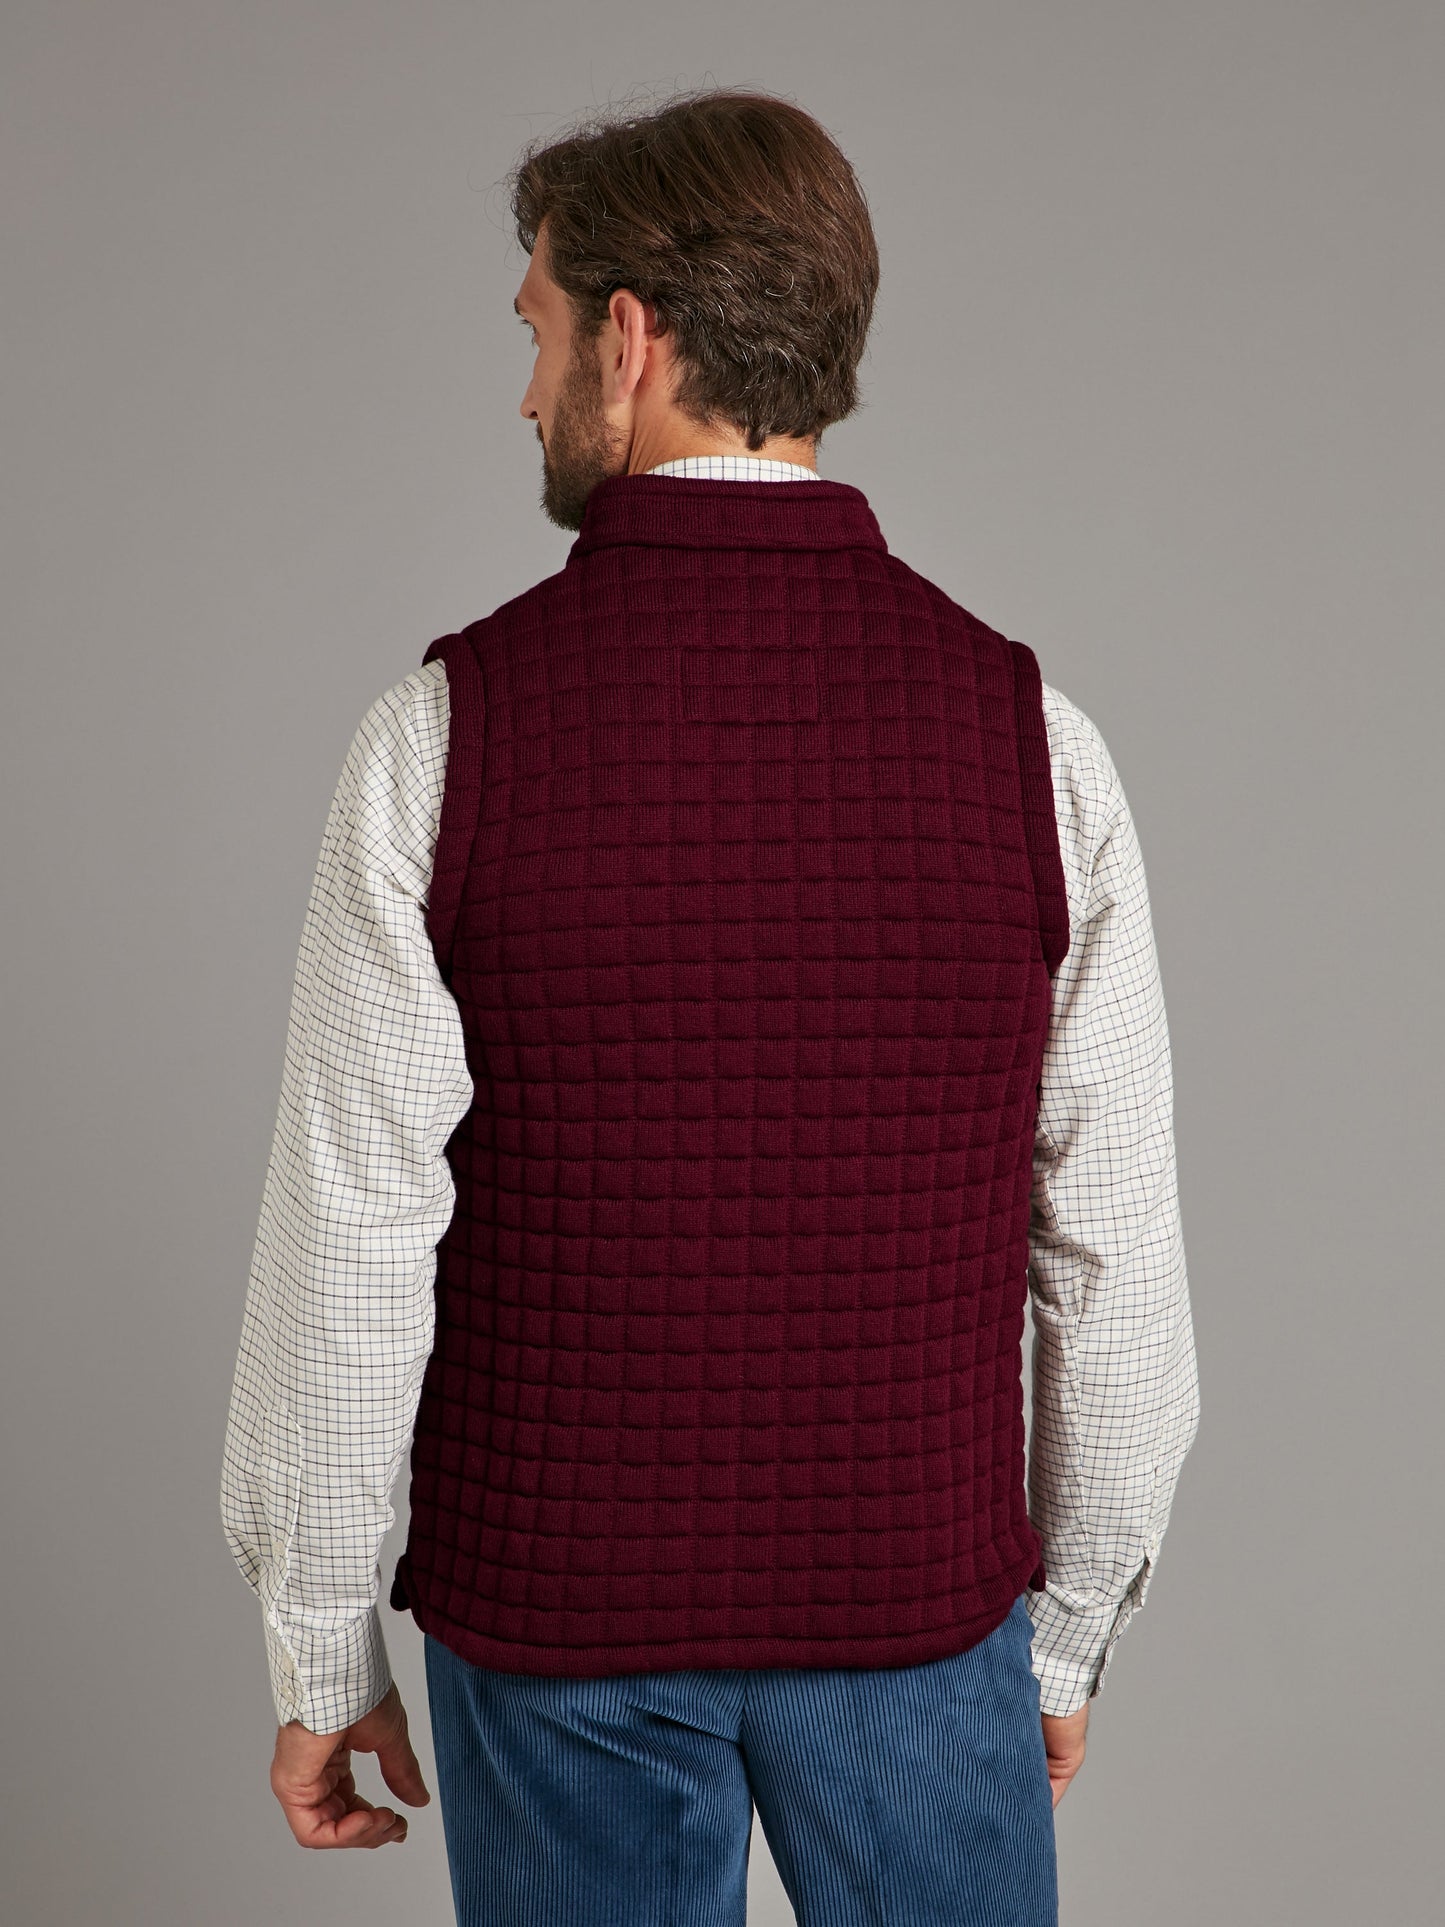 Quilted Thermatex Gilet - Burgundy